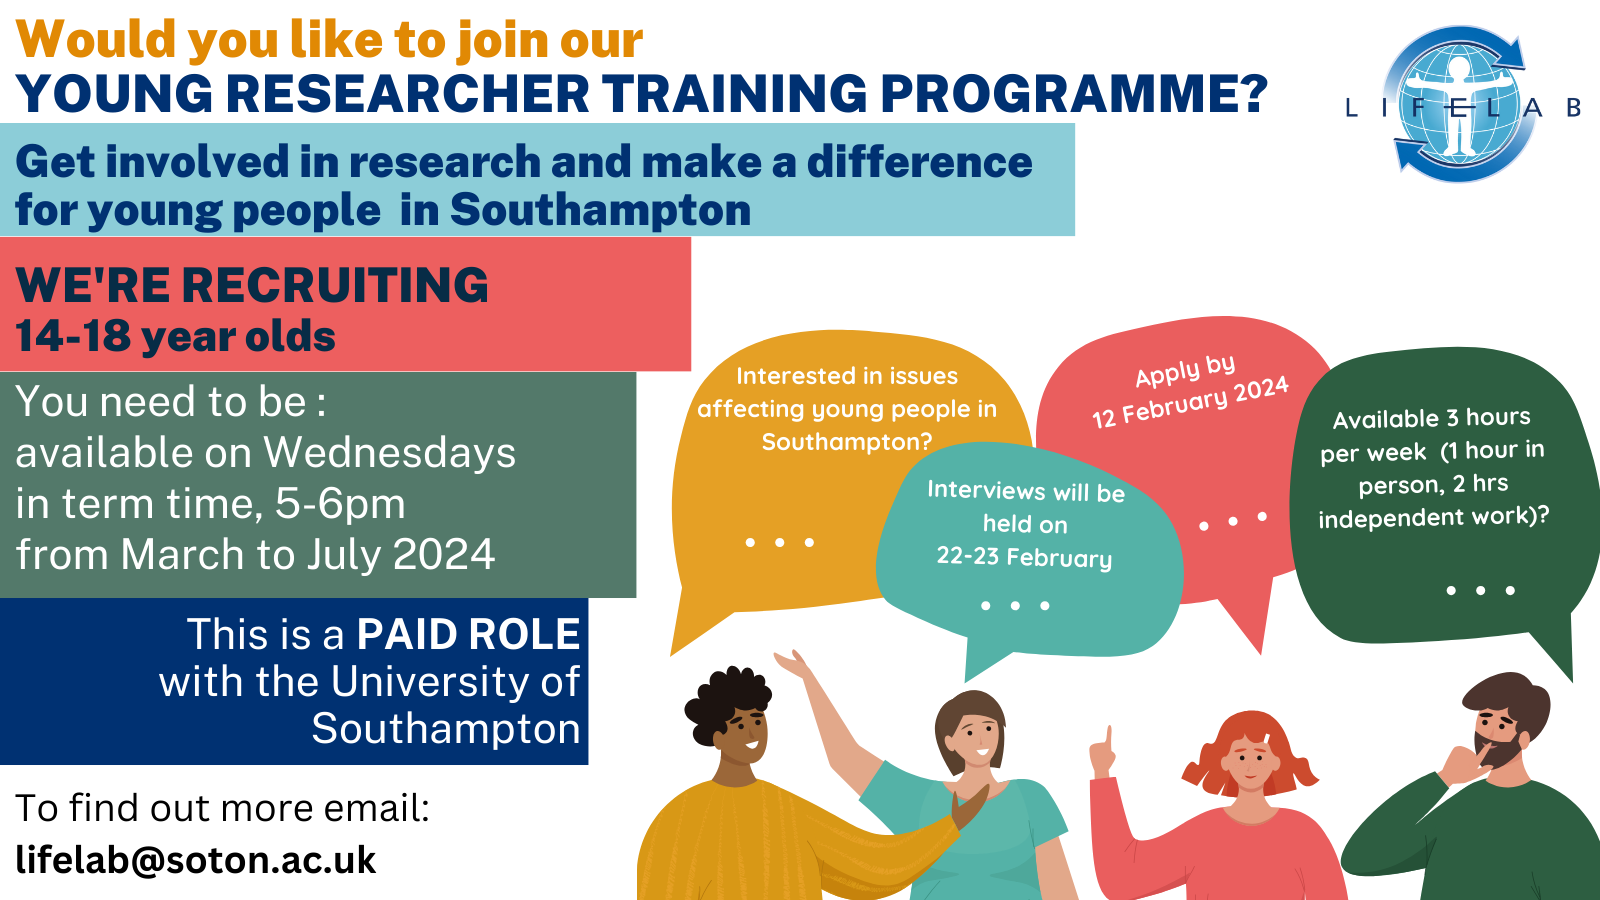 Would you like to join our Young Researcher Training Programme?